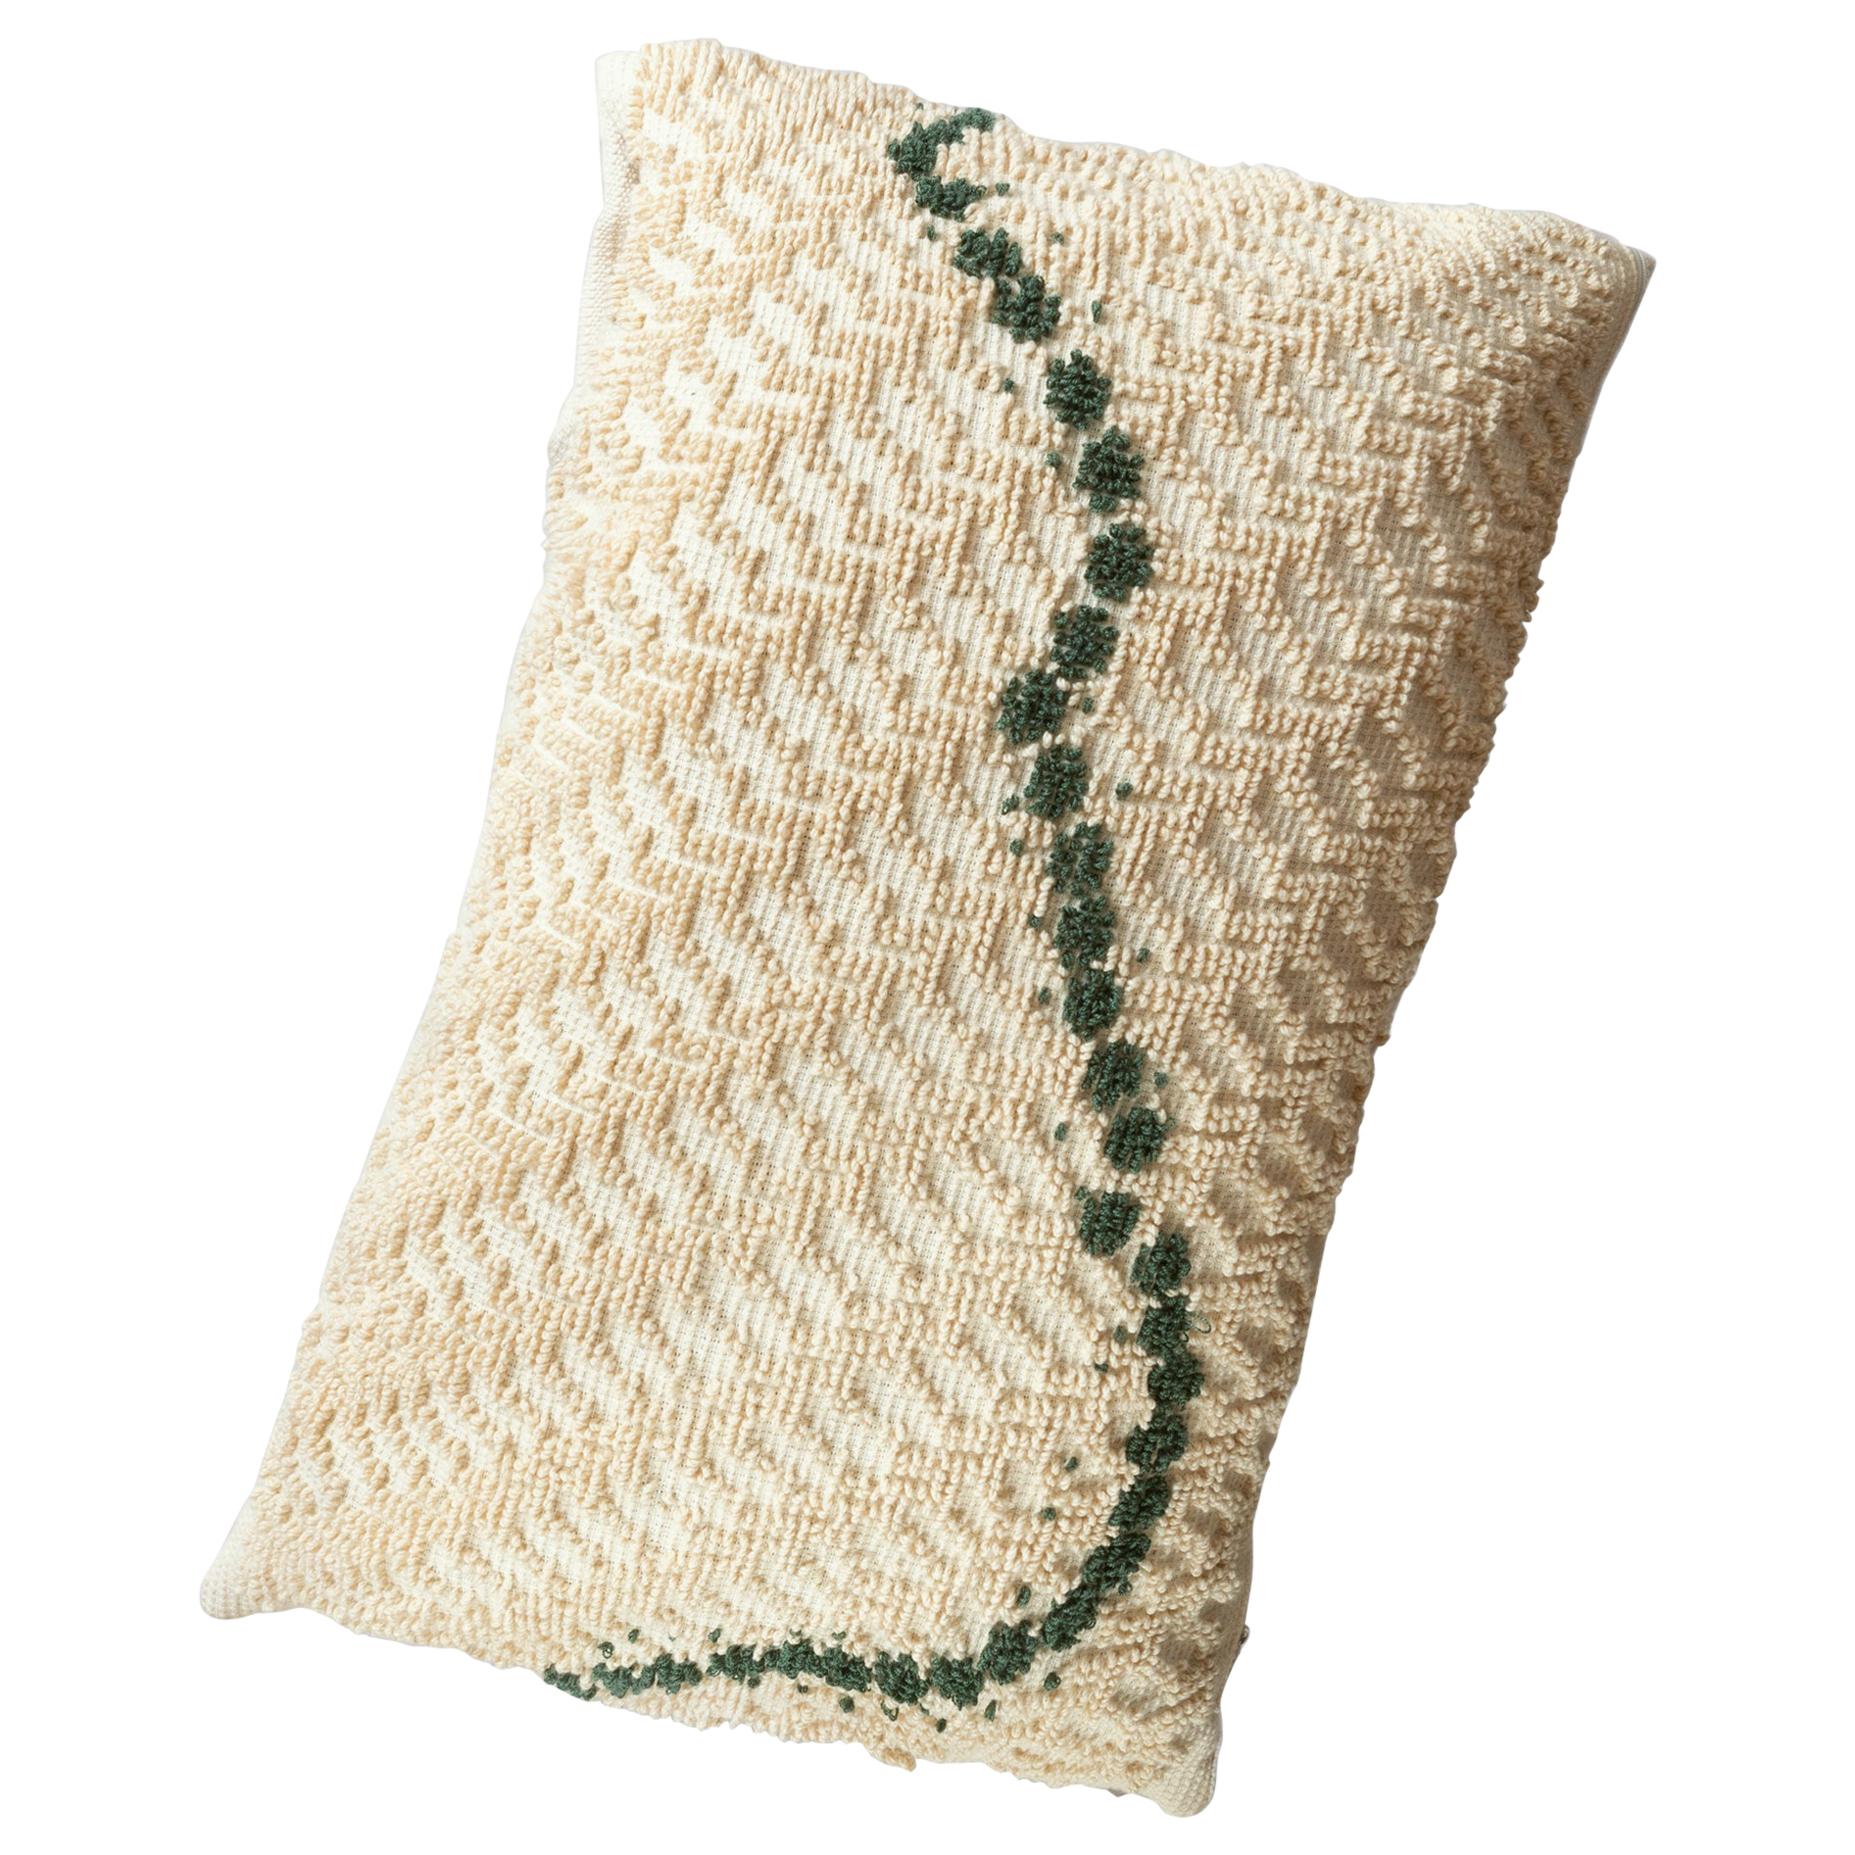 ORMA, Natural White and Green Cotton Cushion